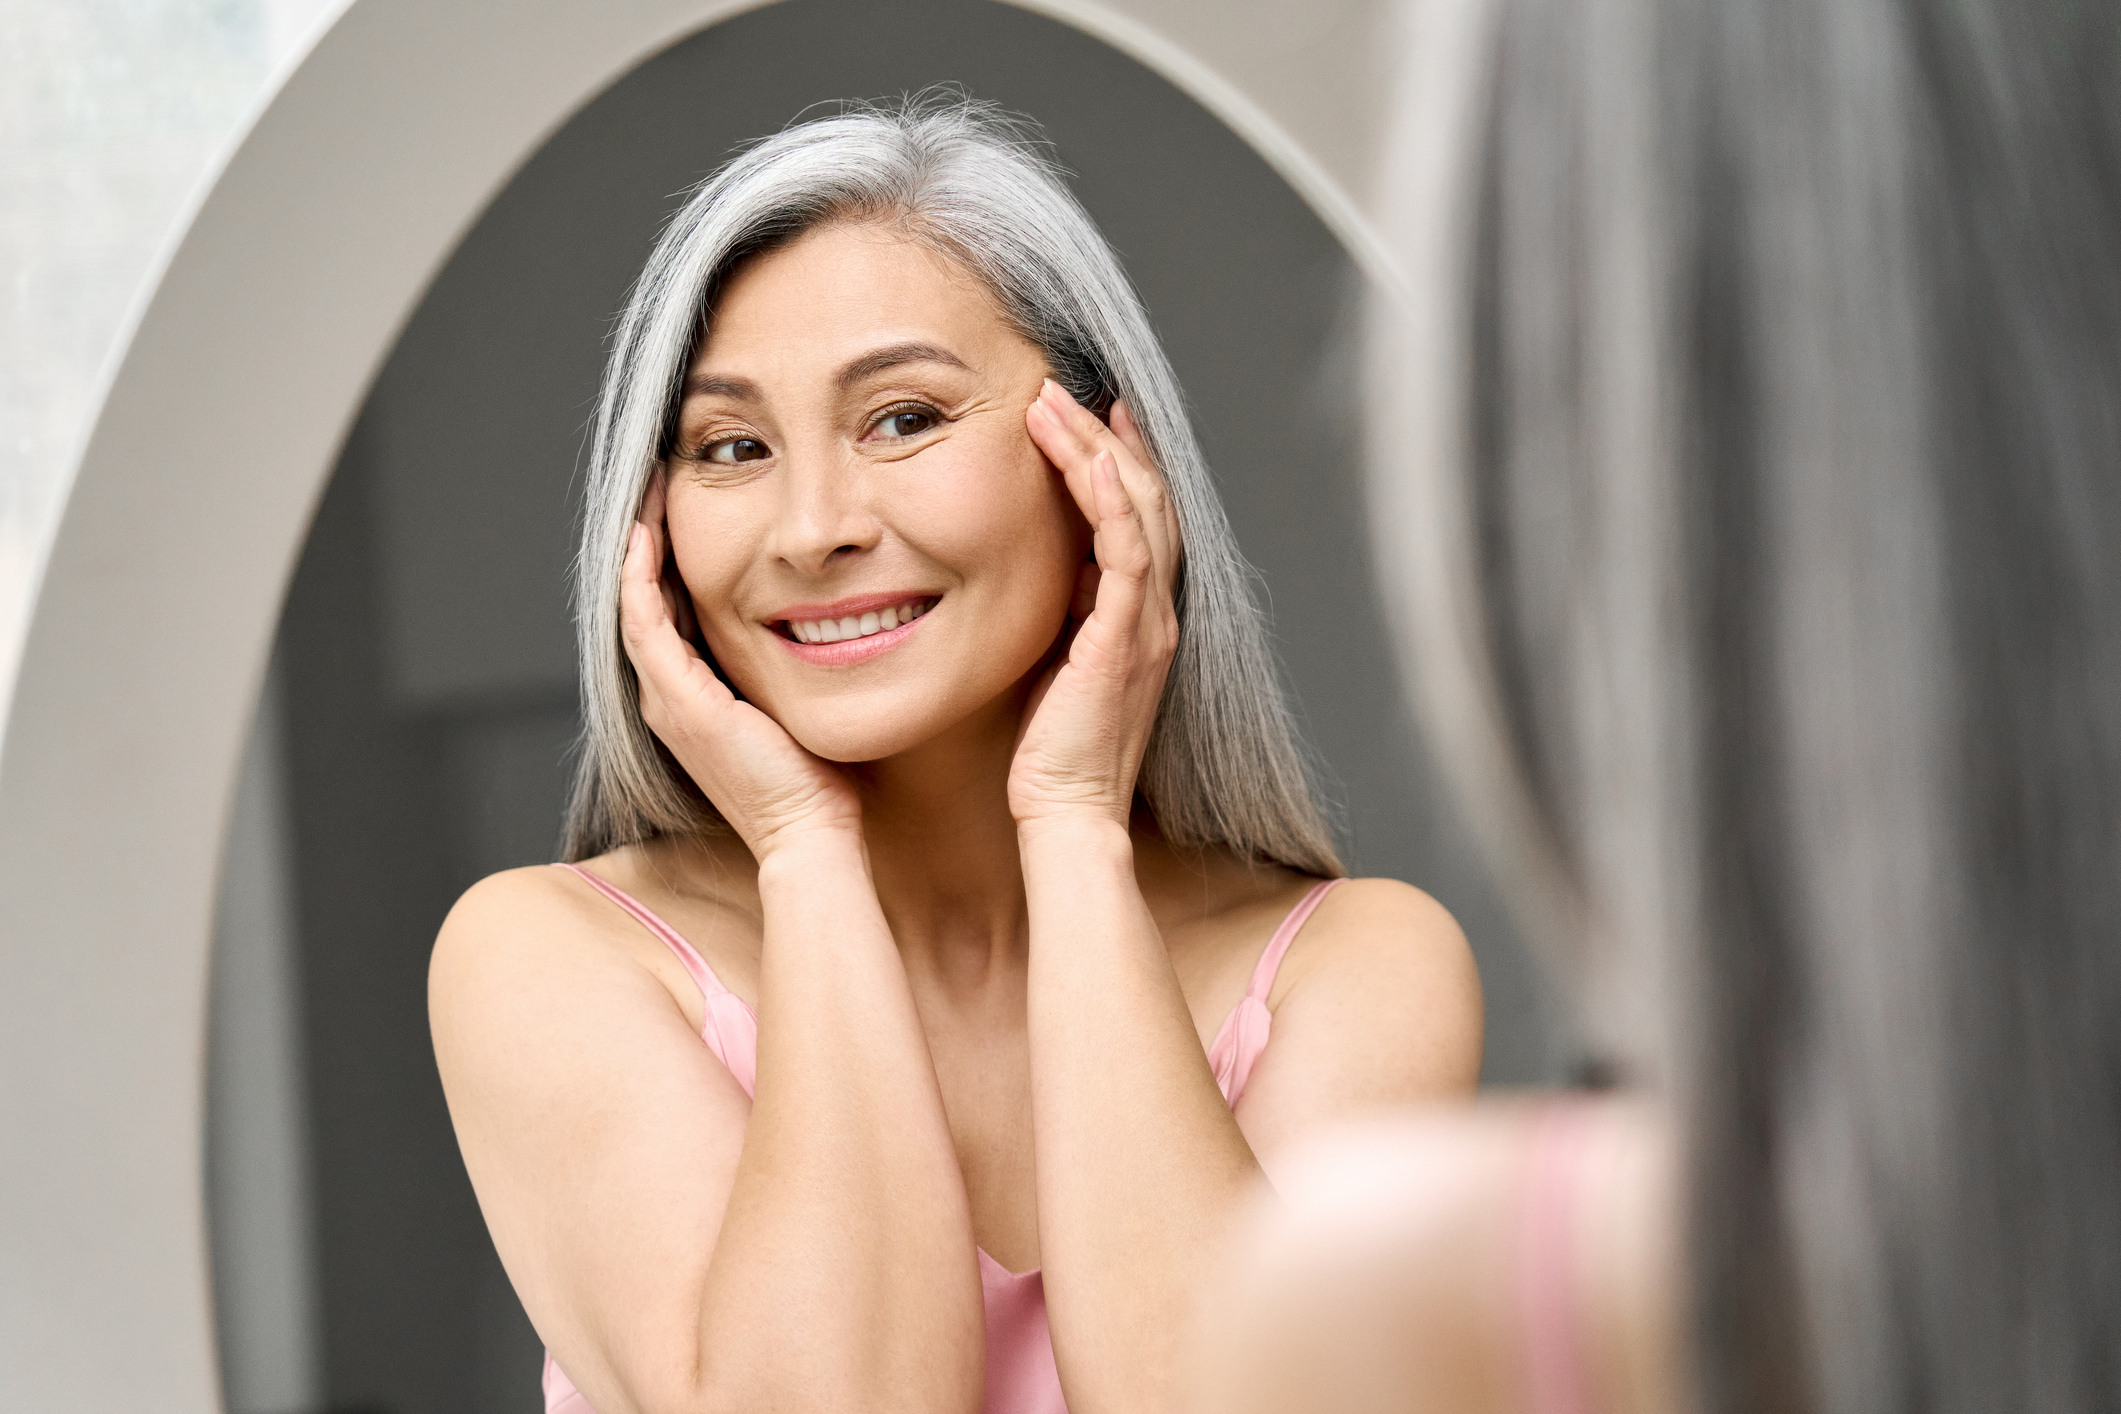 Grey-haired woman smiling and examining her face in a mirror after a successful cosmetic neurotoxin treatment